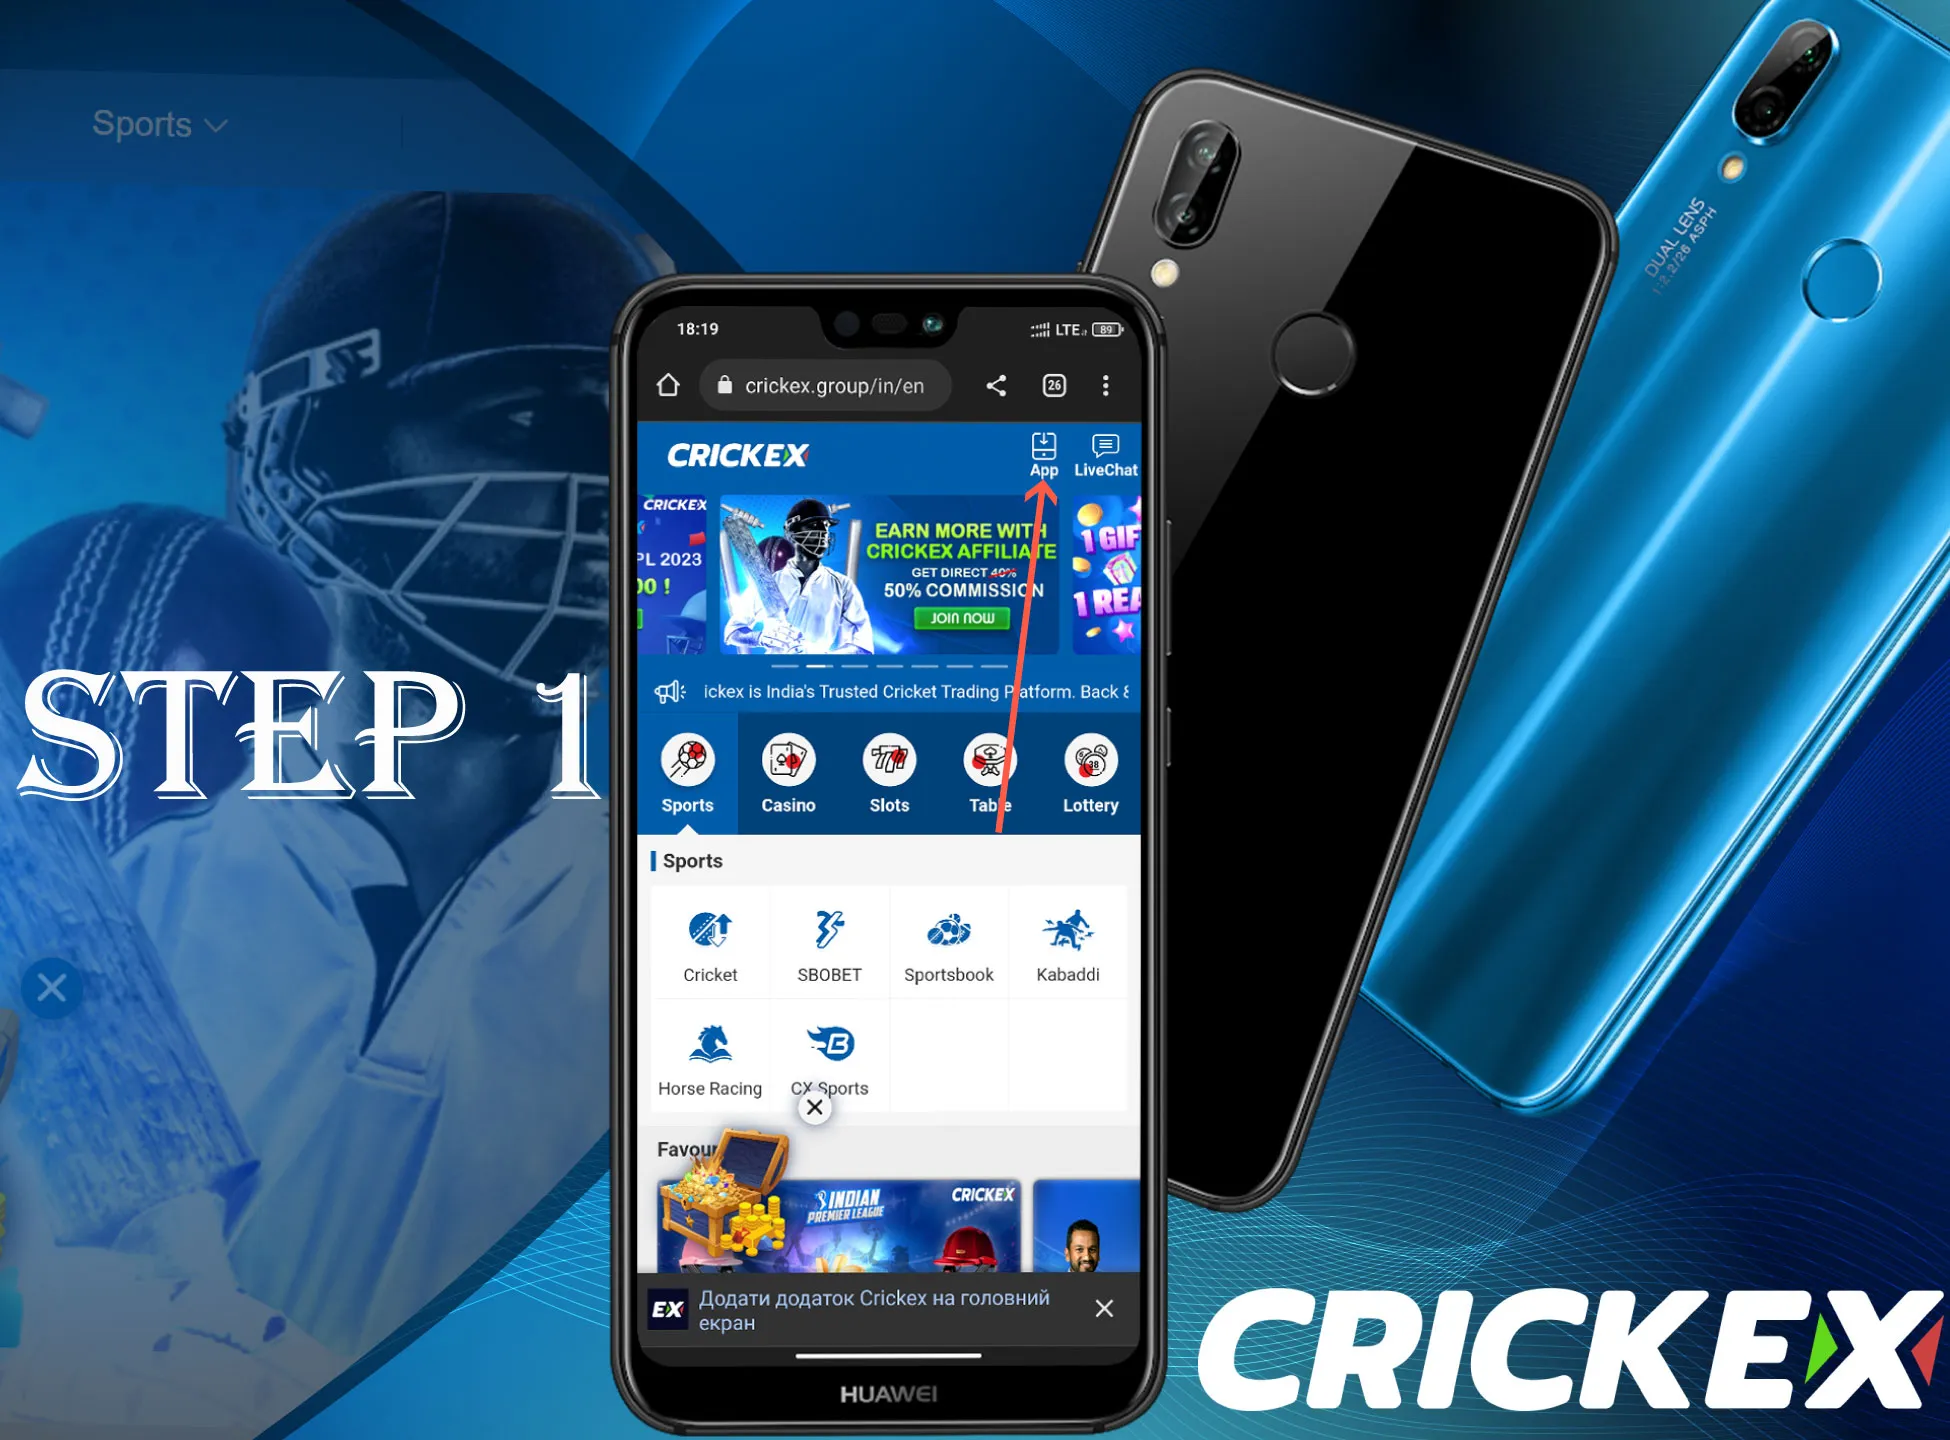 Open the Crickex website and find the diwnload button